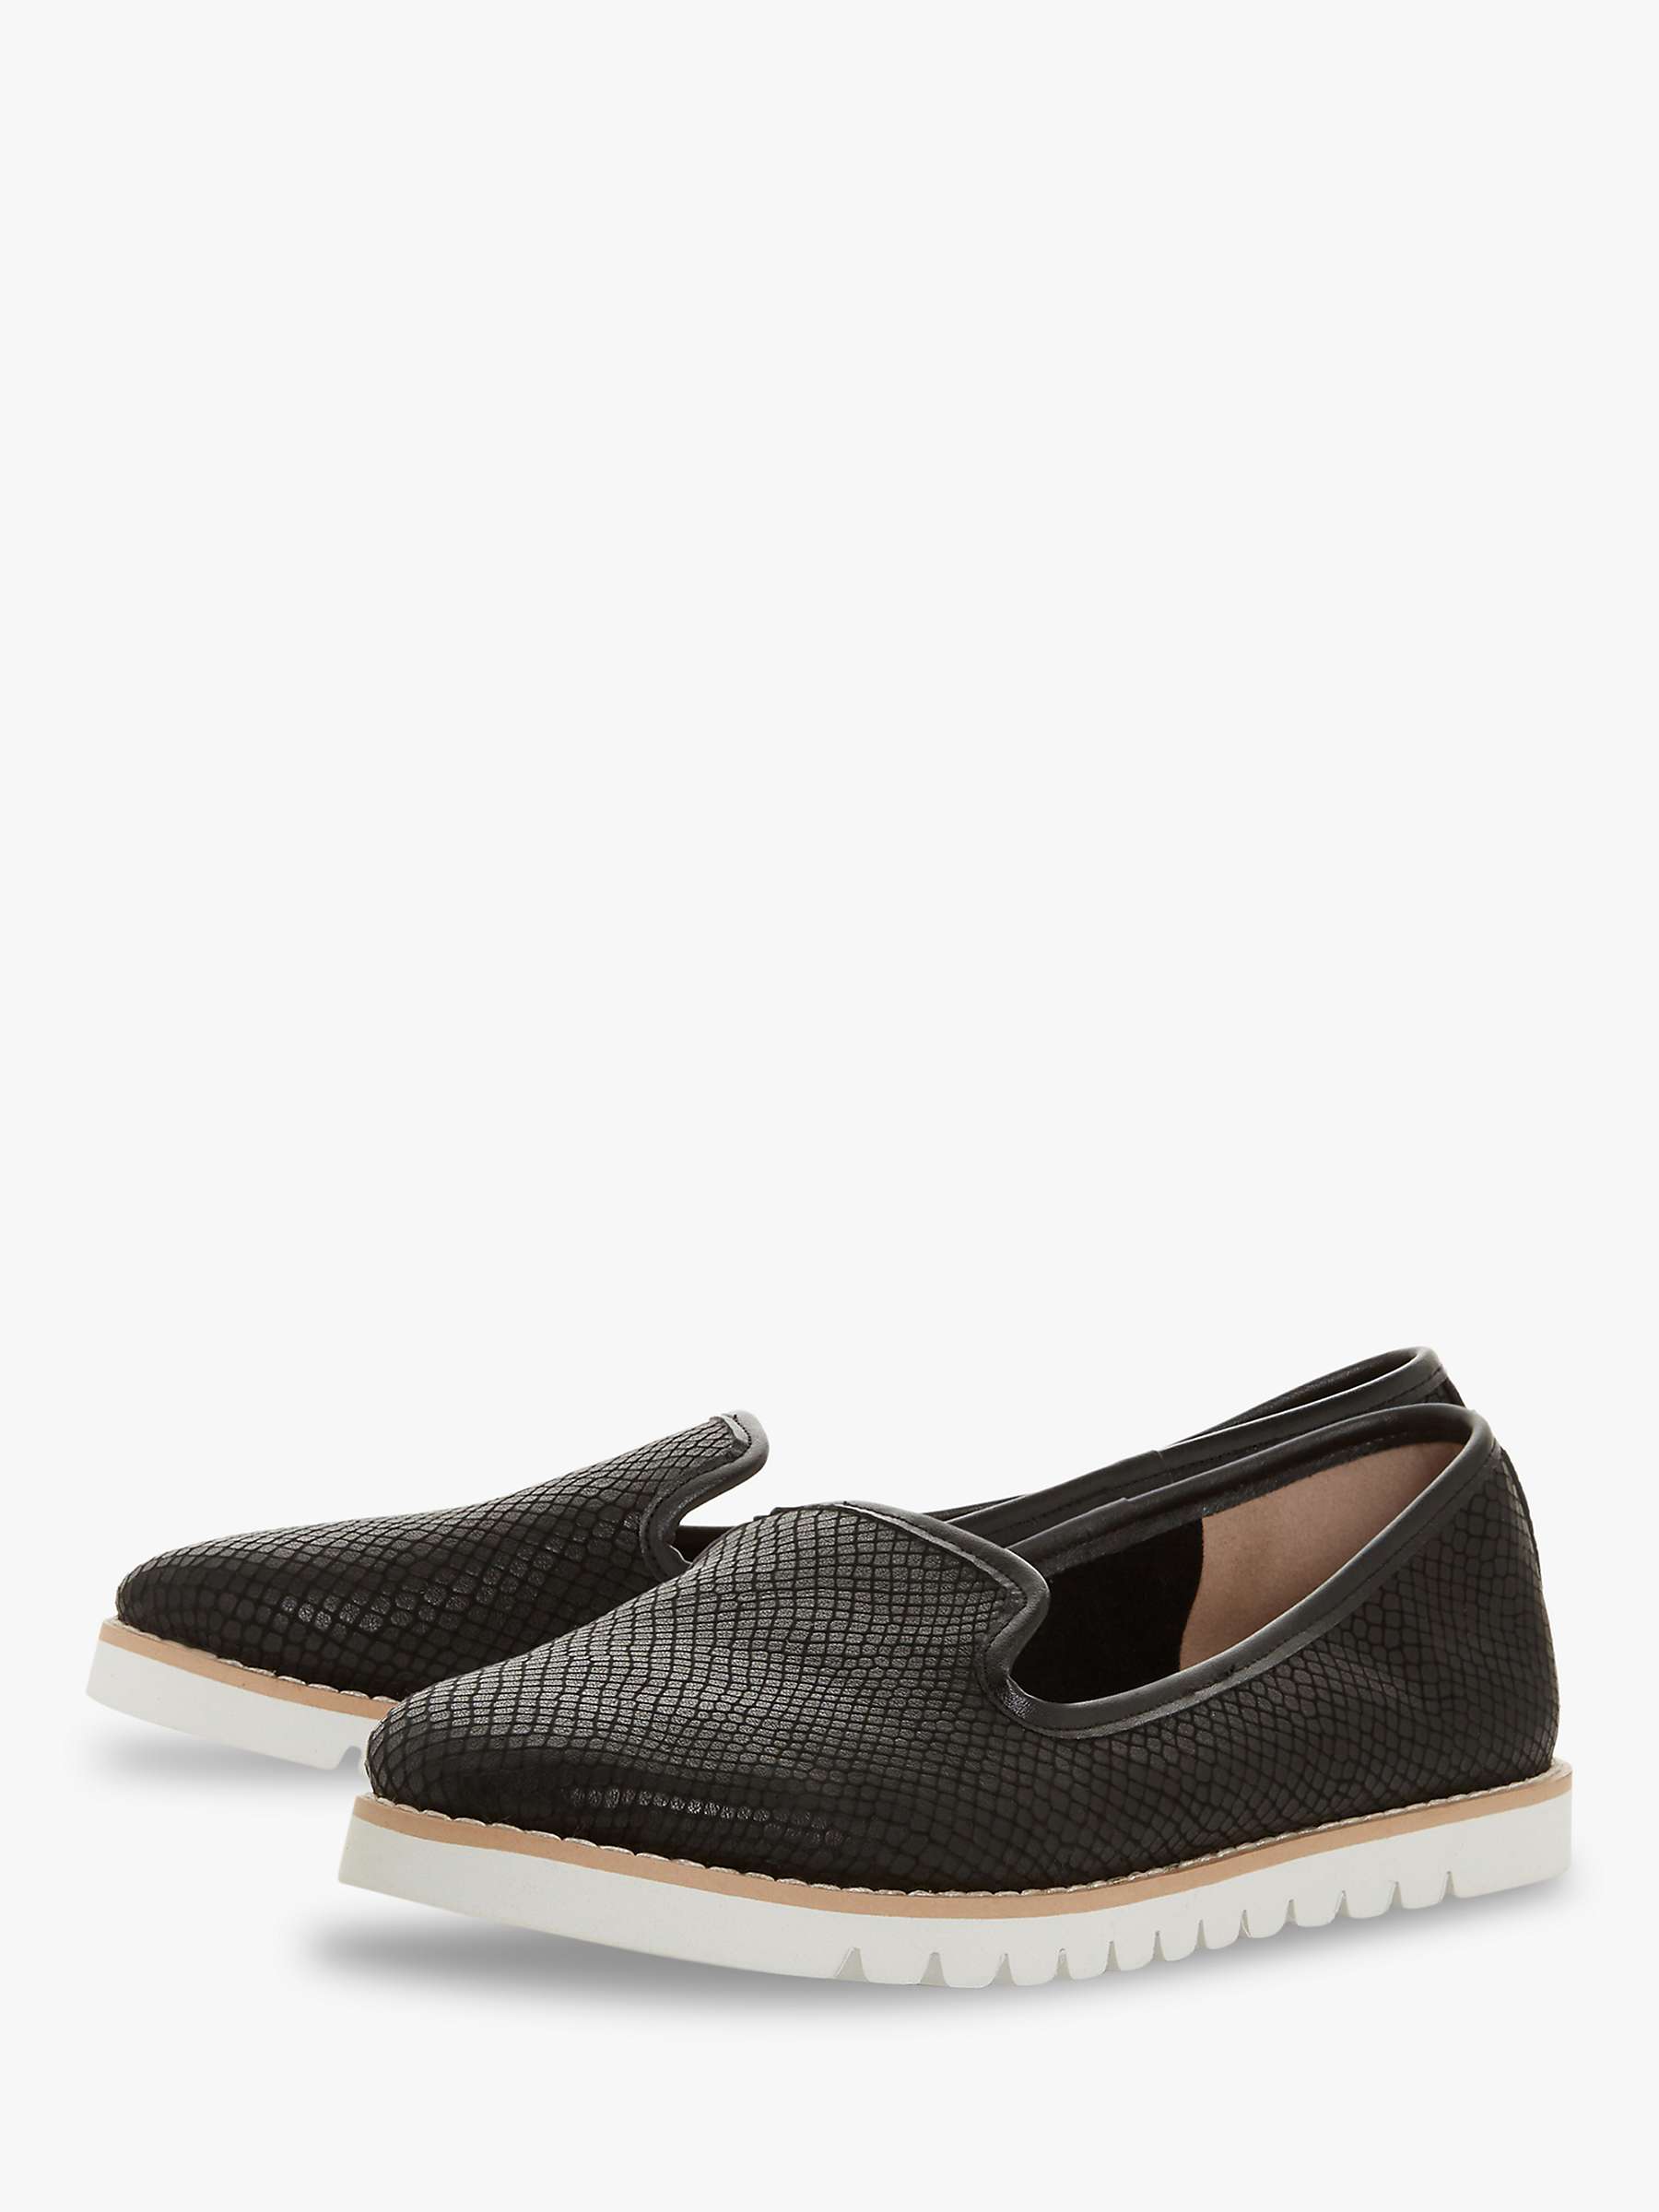 Buy Dune Galleon Ridged Leather Loafers, Black Online at johnlewis.com